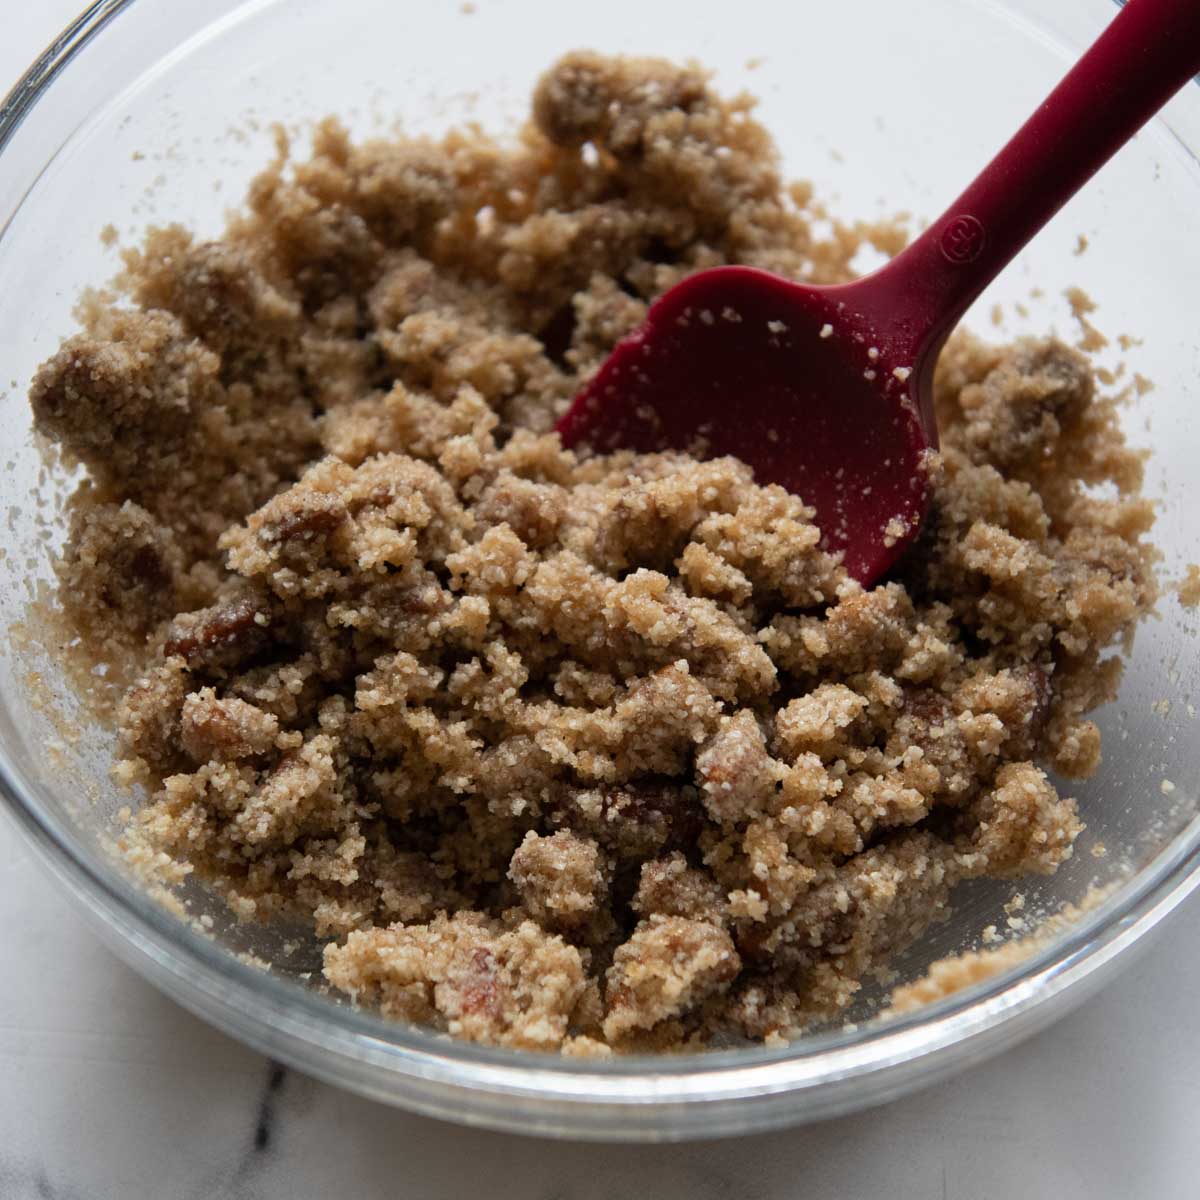 the almond streusel topping in a bowl.